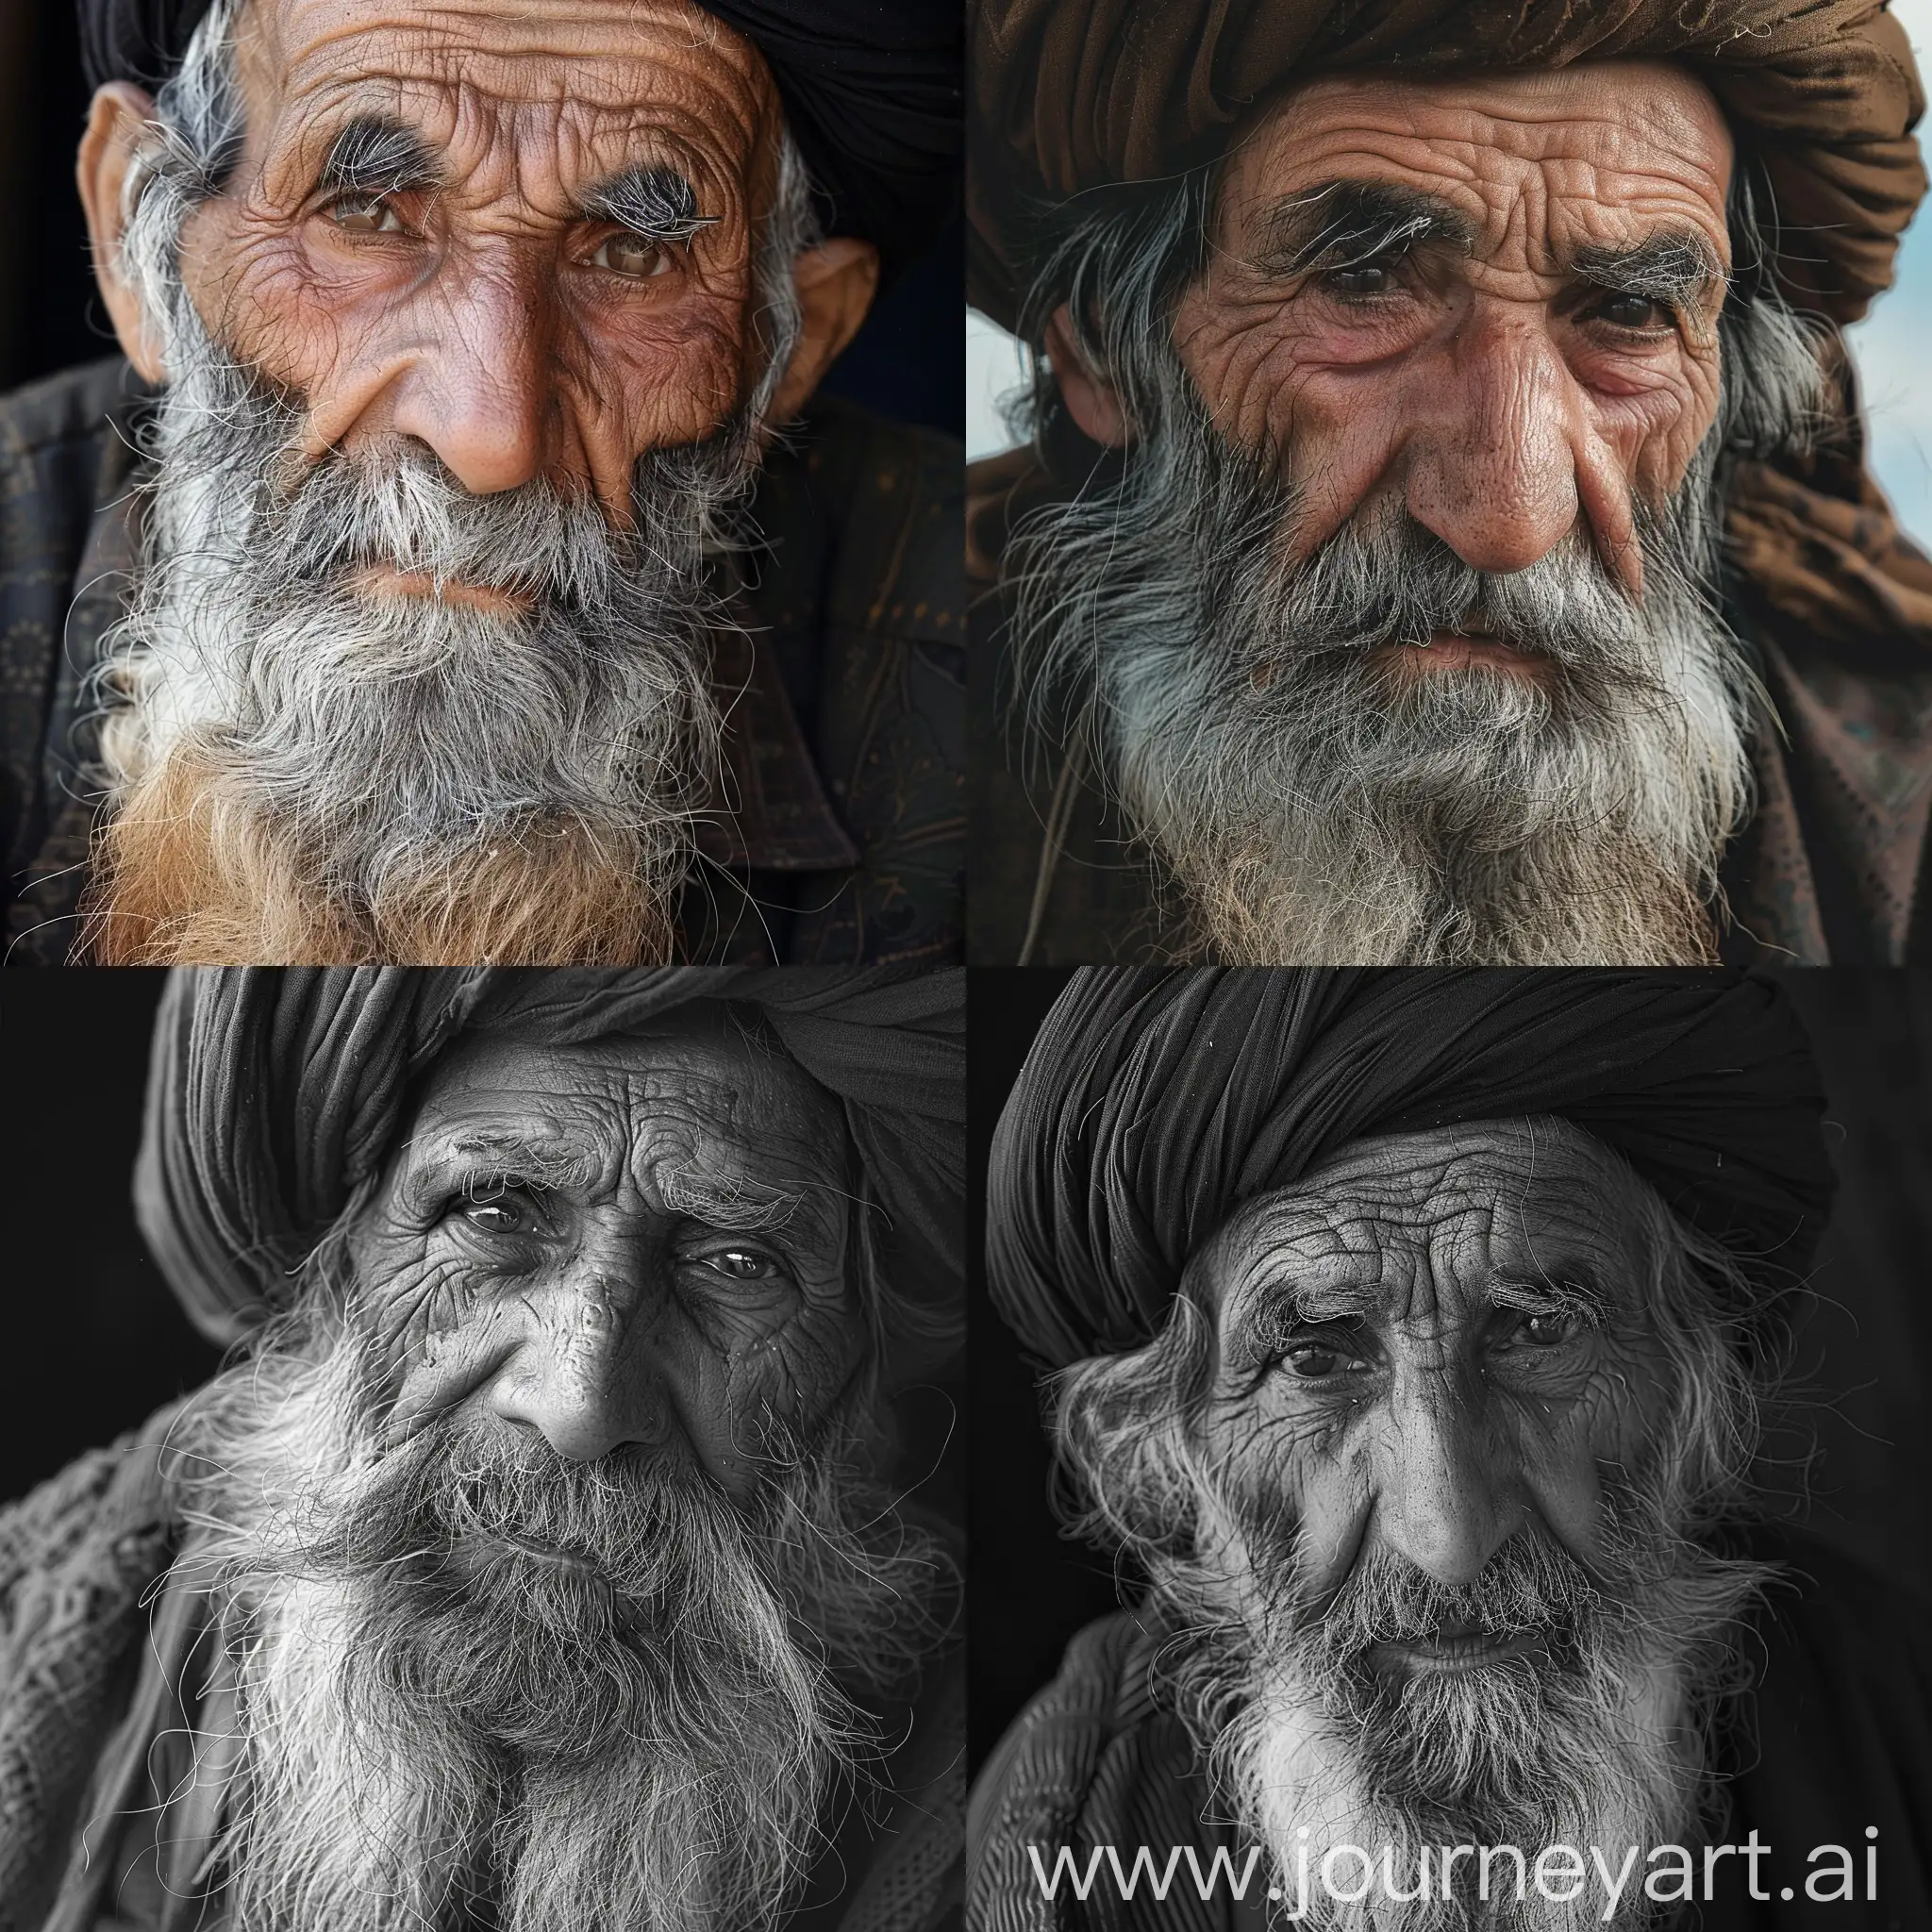 An old Iranian man, Zal, who is Jango, lives in very old years and has a long beard